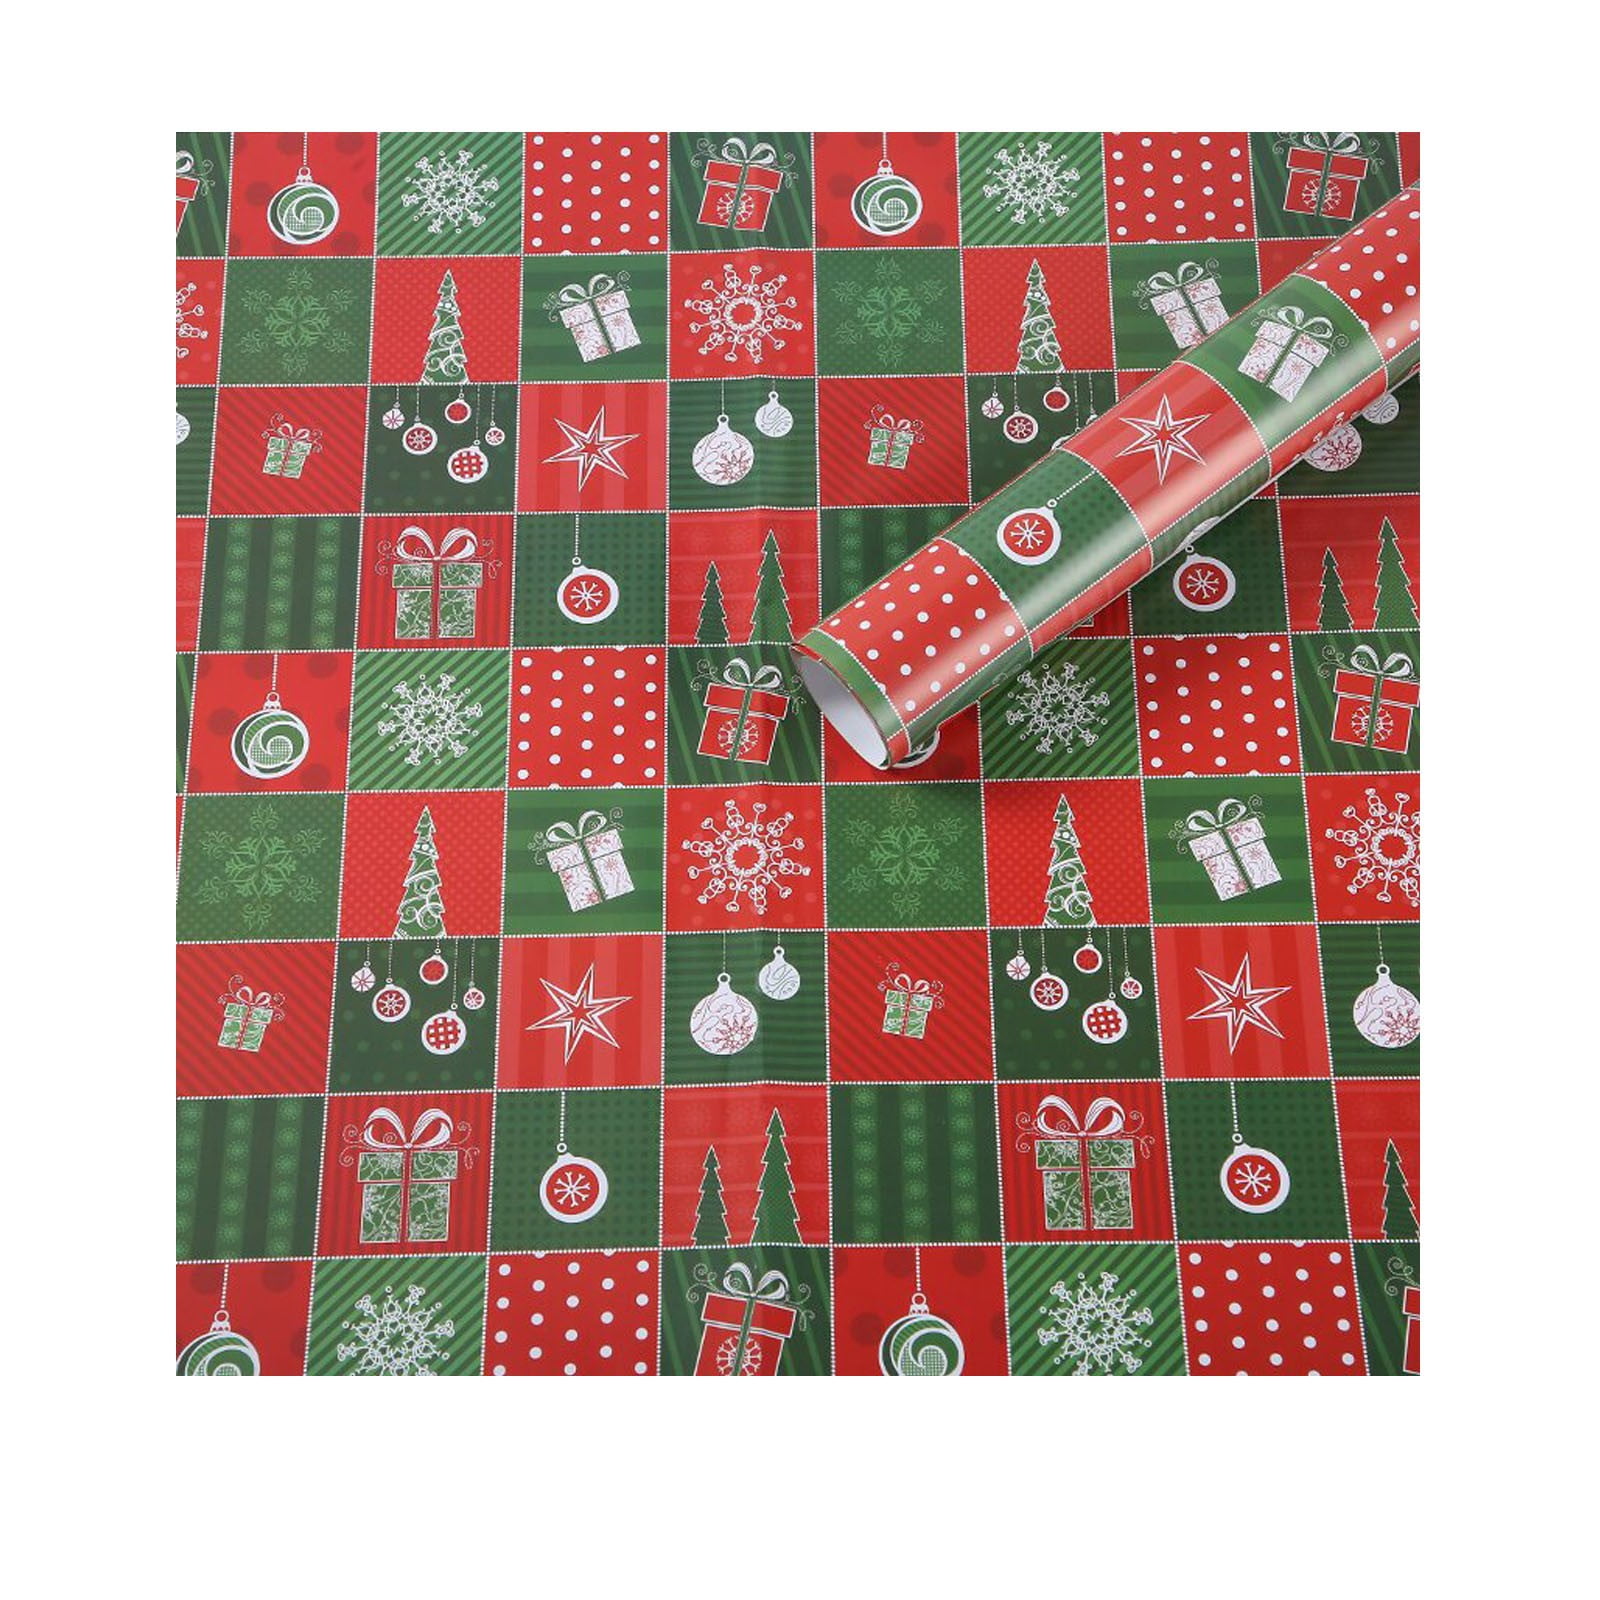 RUSPEPA Christmas Wrapping Paper, Jumbo Roll Kraft Paper - Red and Green  Plaid Reindeer Design for Holiday Gift Wrap - 30 Inches x 100 Feet